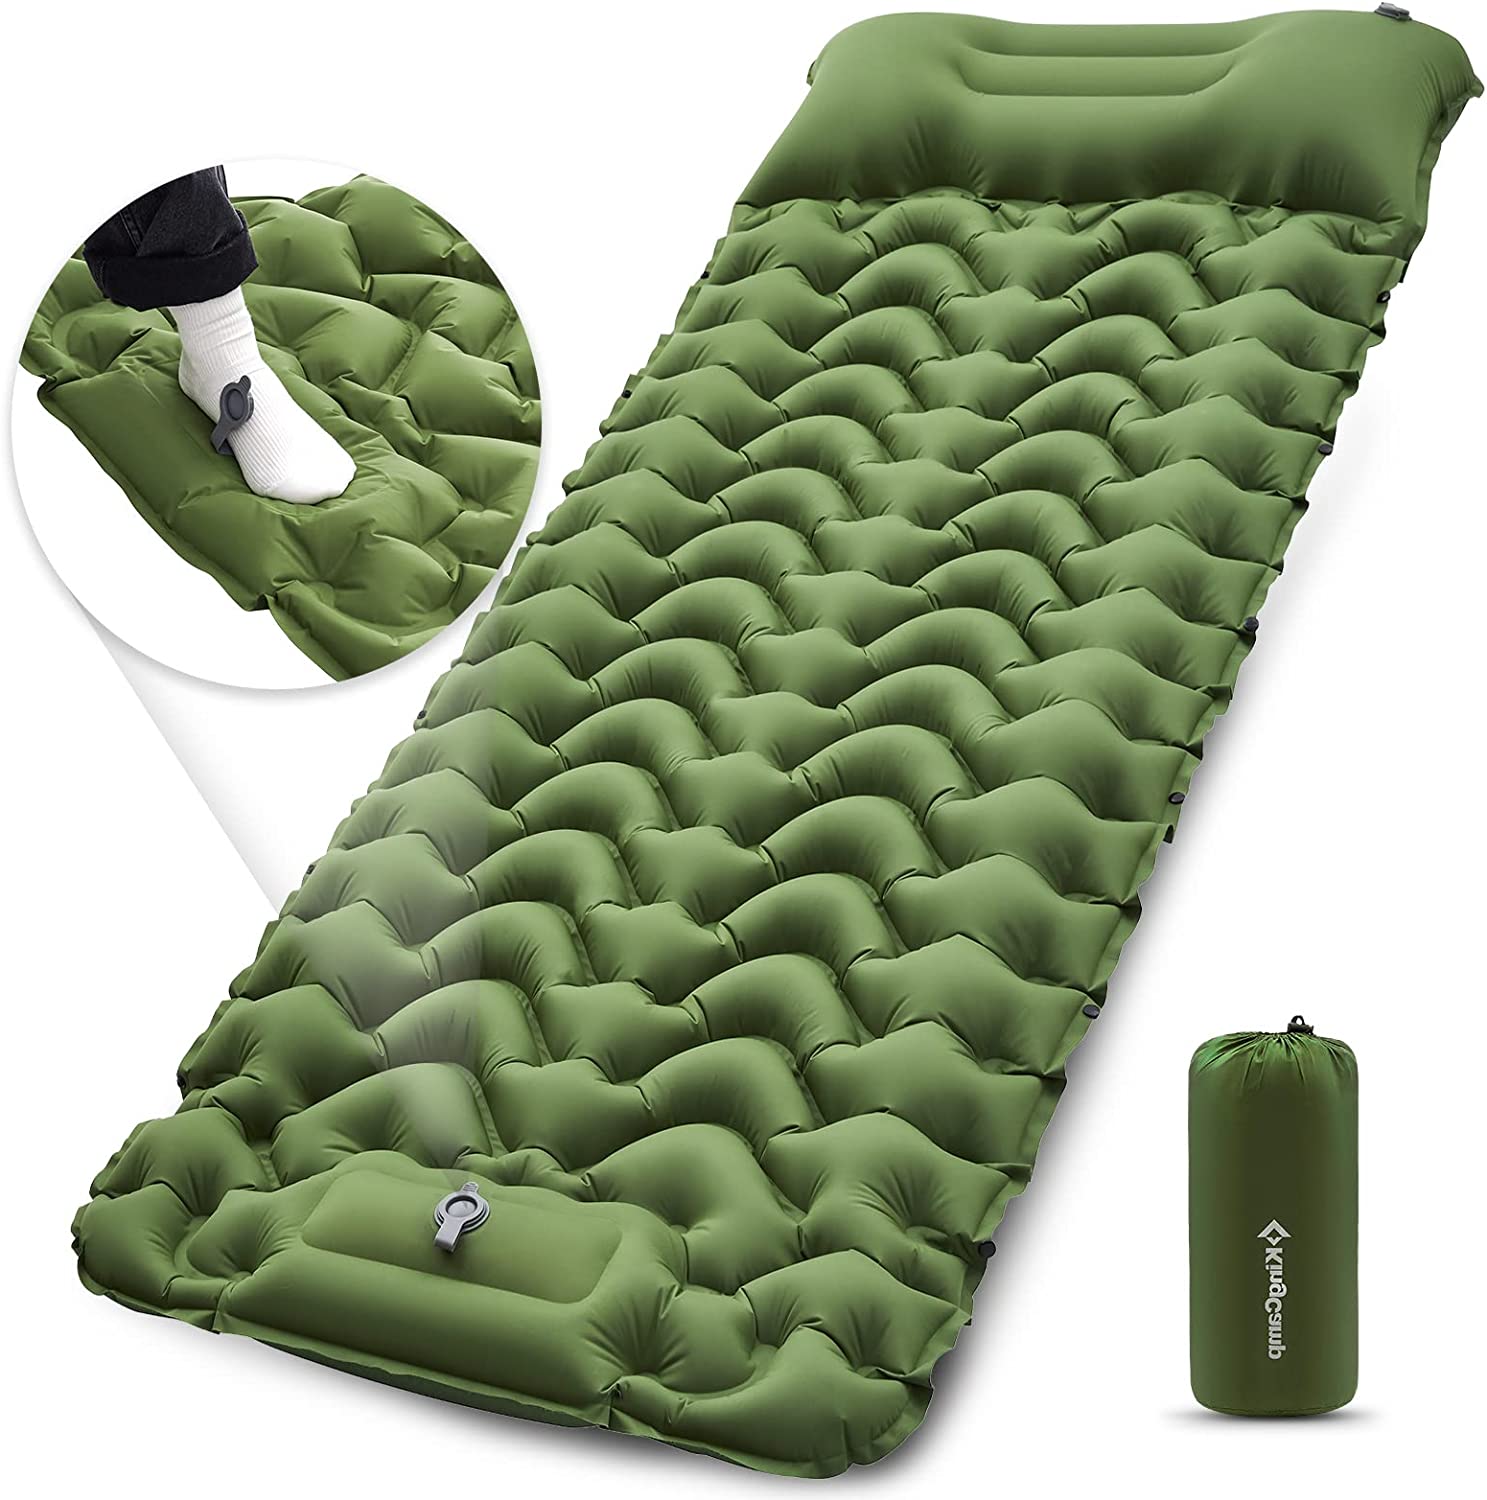 KingCamp Ultralight Self Inflating Sleeping Pad with Built-in Foot Pump and Pillow